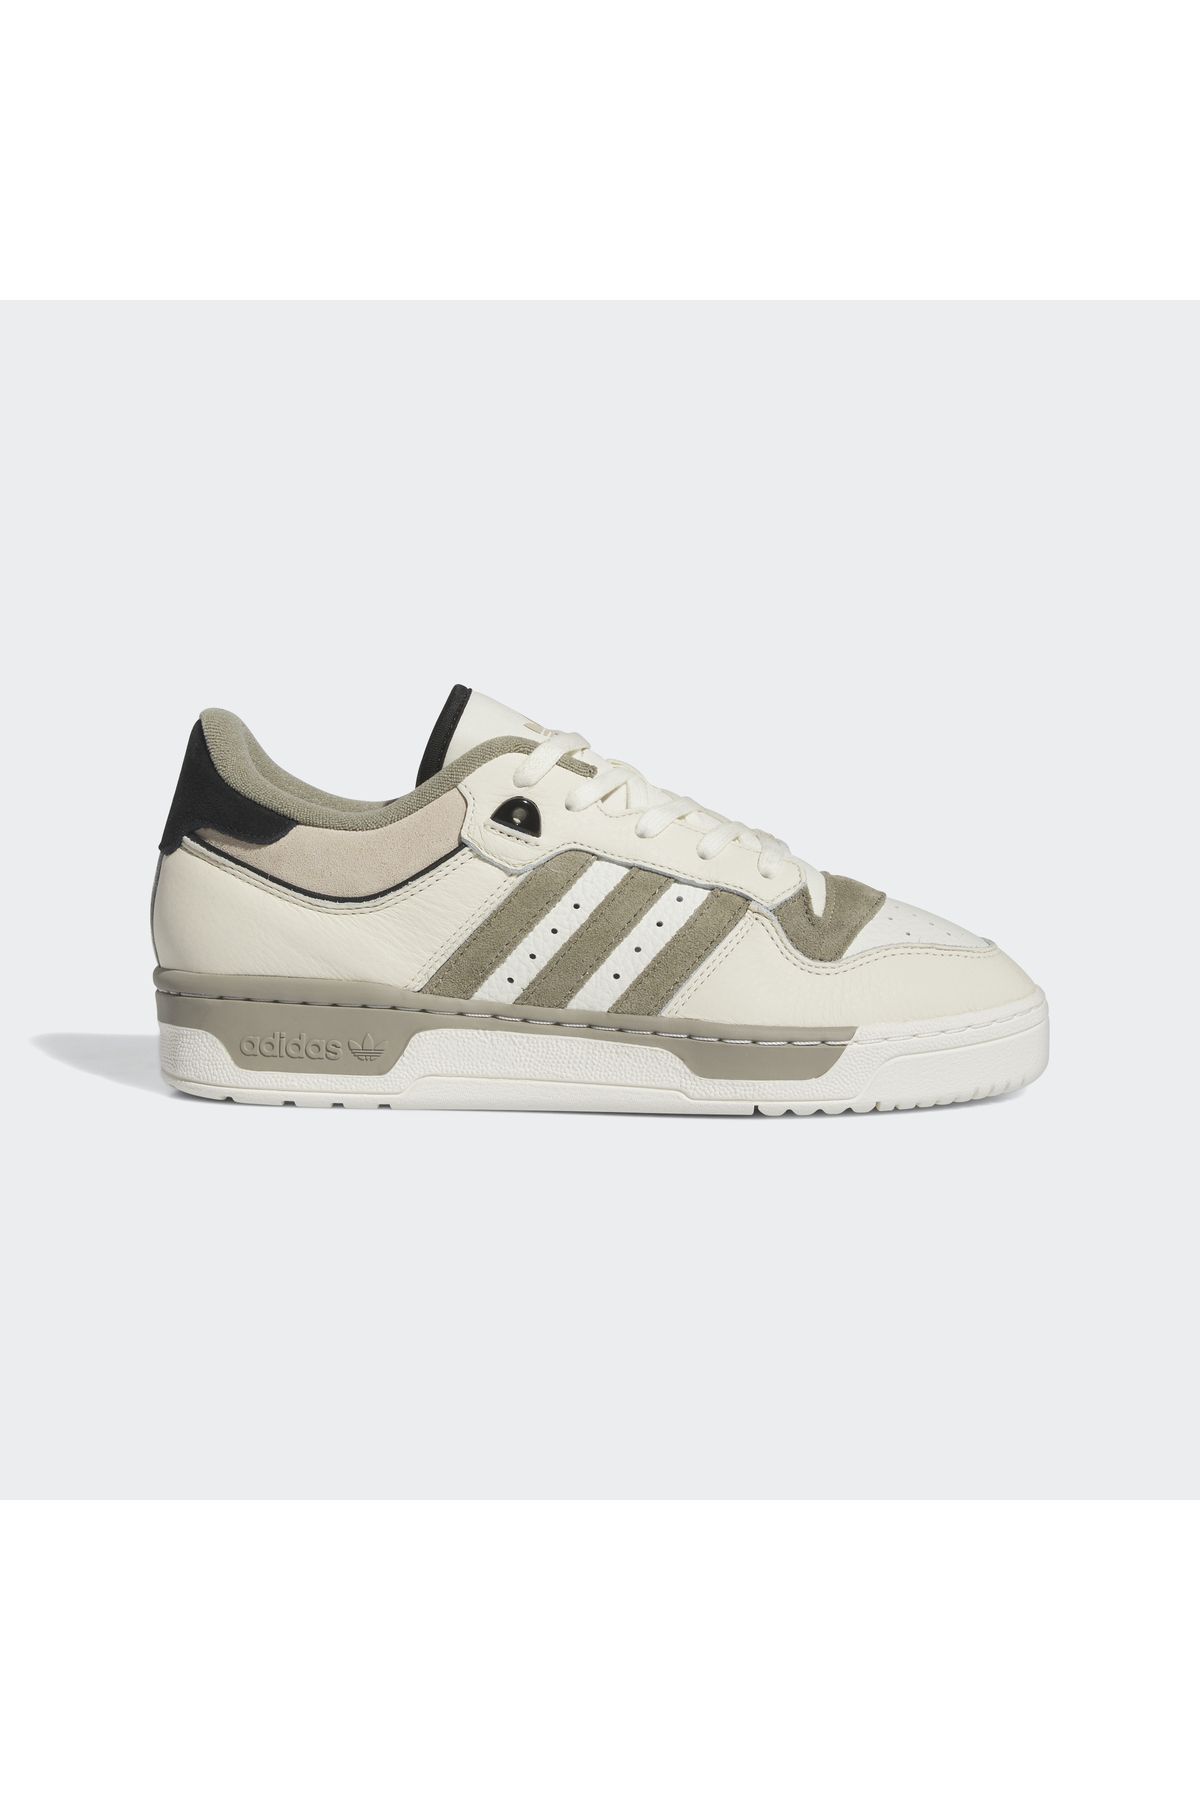 adidas IE7171 ADİDAS IE7171 RIVALRY 86 LOW